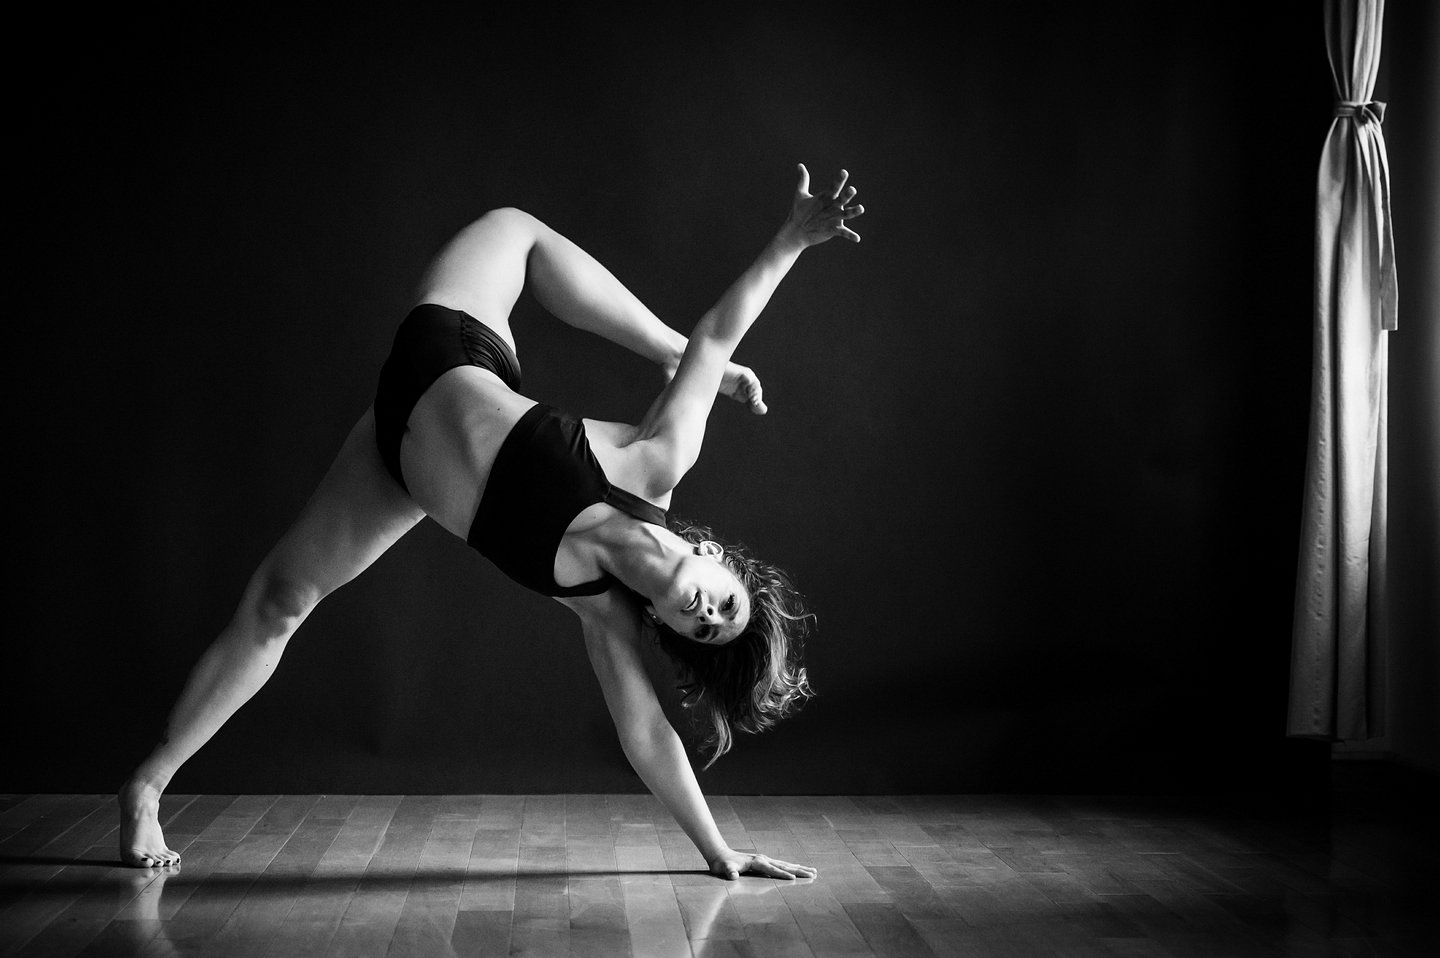 Los Angeles Dance Portrait Photo - Stephanie Abrams - by Tommy Xing Photography 07.jpg